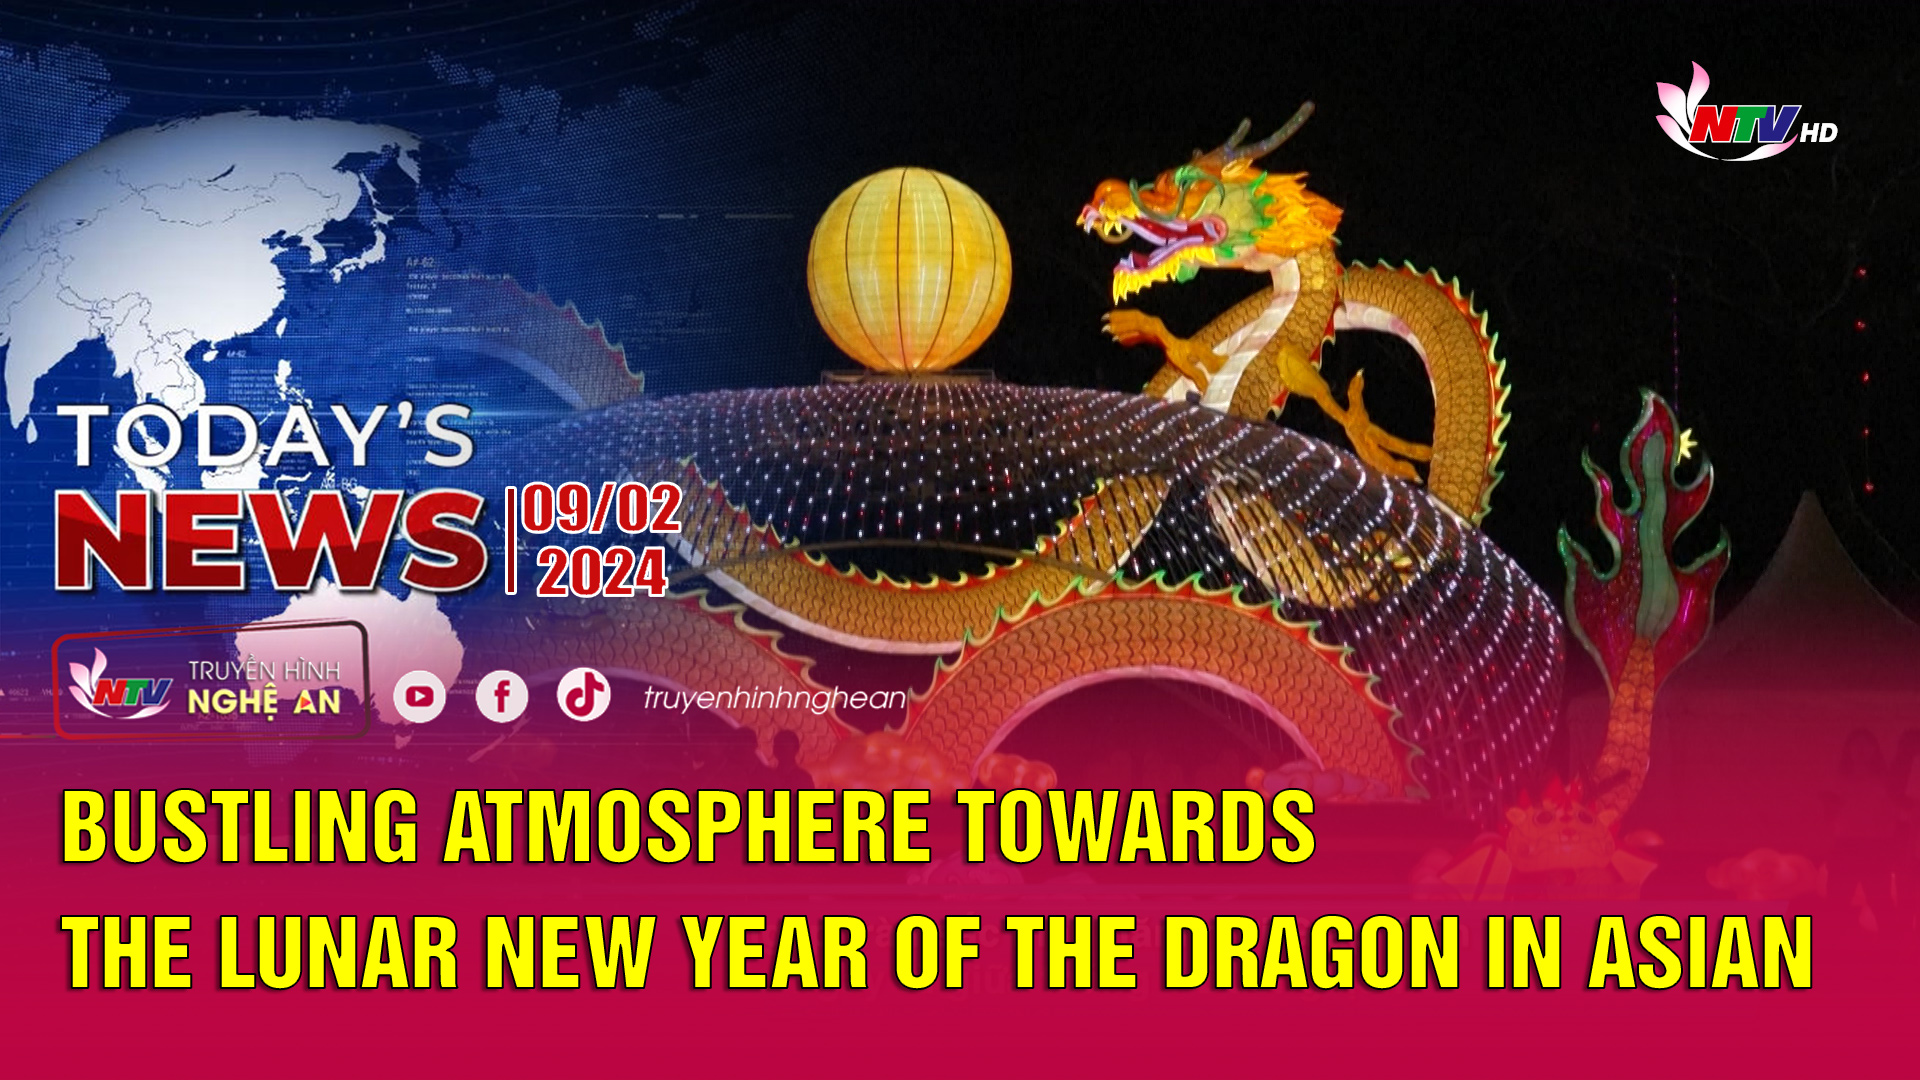 Today's News - 09/02/2024: Bustling atmosphere towards the Lunar New Year of the Dragon in Asian countries.